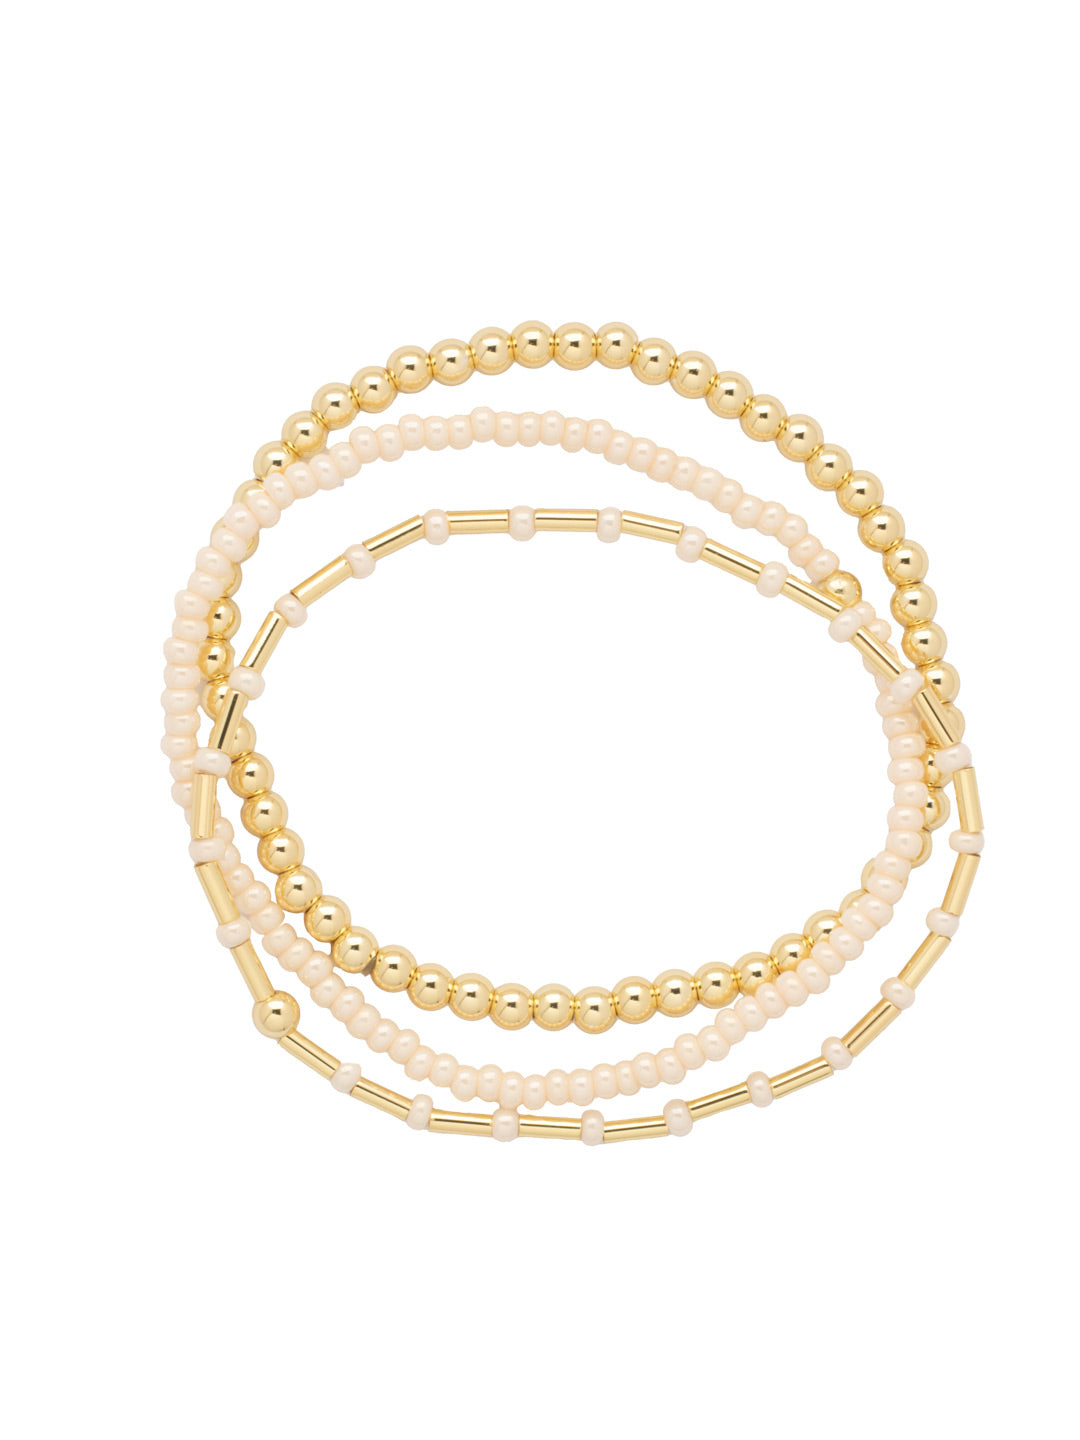 Trina Stretch Bracelet - BFM5BGMDP - <p>The Trina Stretch Bracelets features 3 assorted stretch bracelets; perfect to mix, match, and stack with your favorite bracelets! From Sorrelli's Modern Pearl collection in our Bright Gold-tone finish.</p>